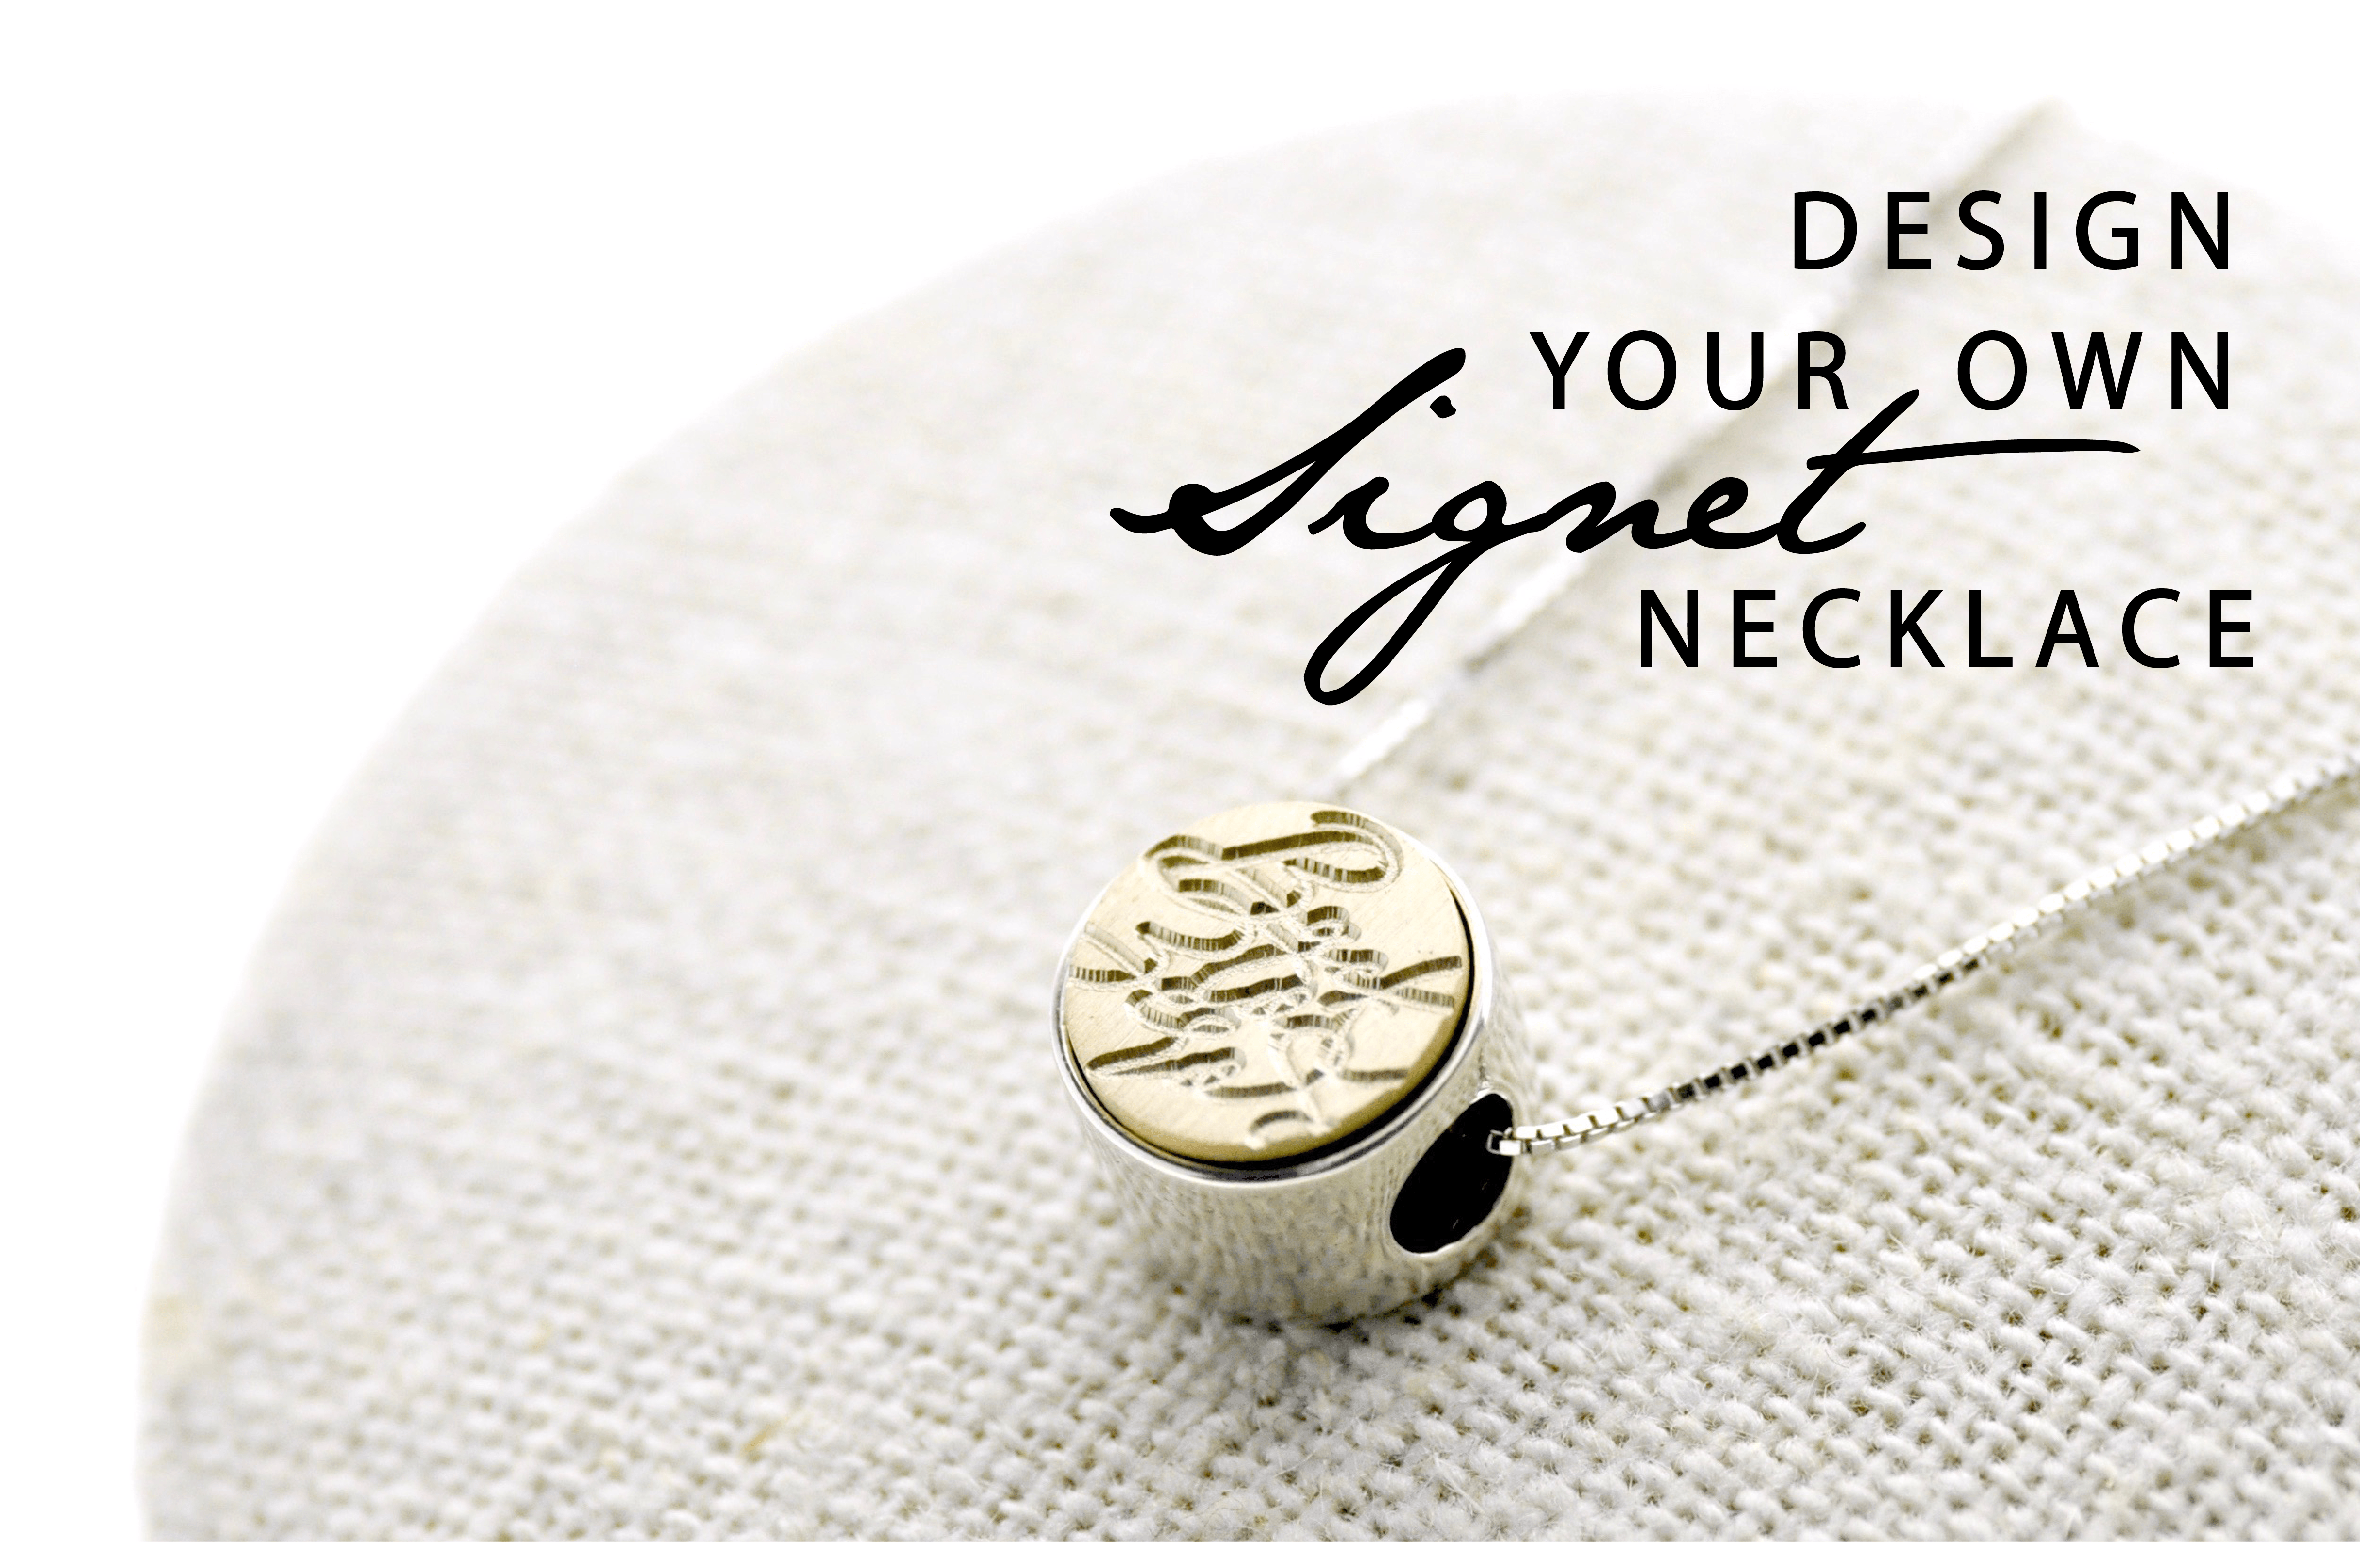 Design Your Own Elements Necklace By J&S Jewellery | notonthehighstreet.com